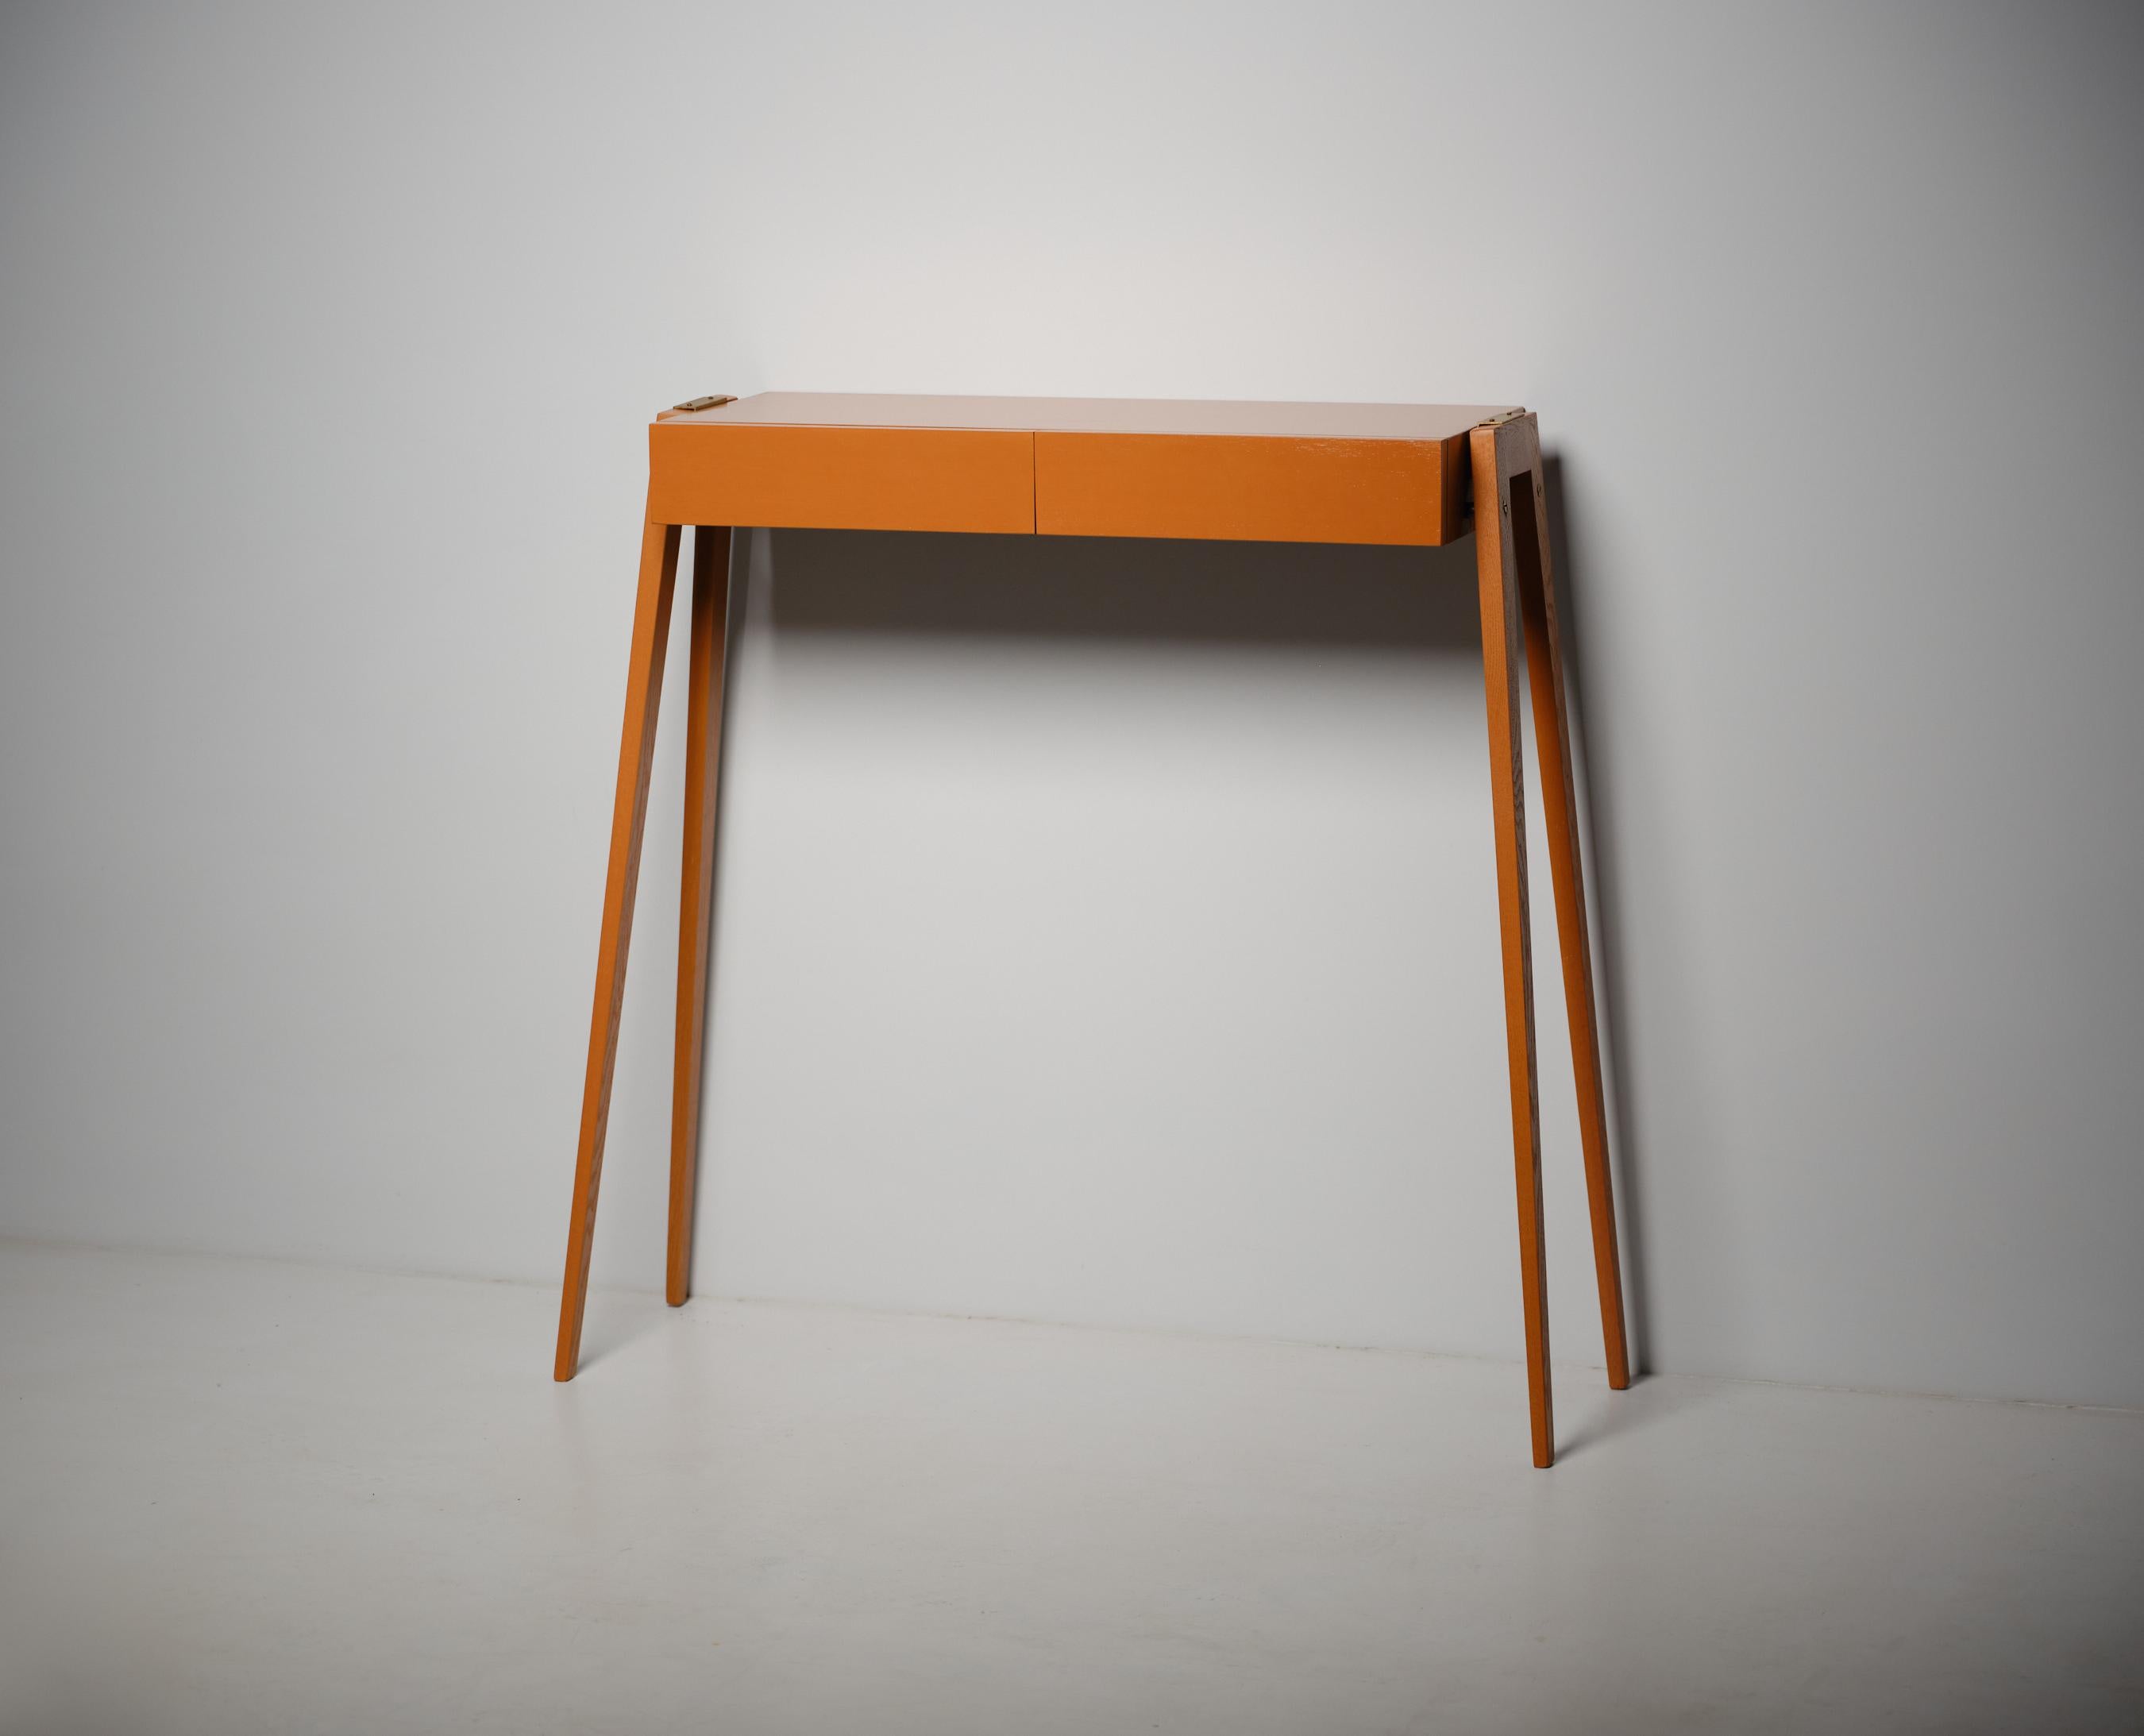 Brass Italian Design Console from the 1950s: Restyled Elegance in Modern Rust Orange